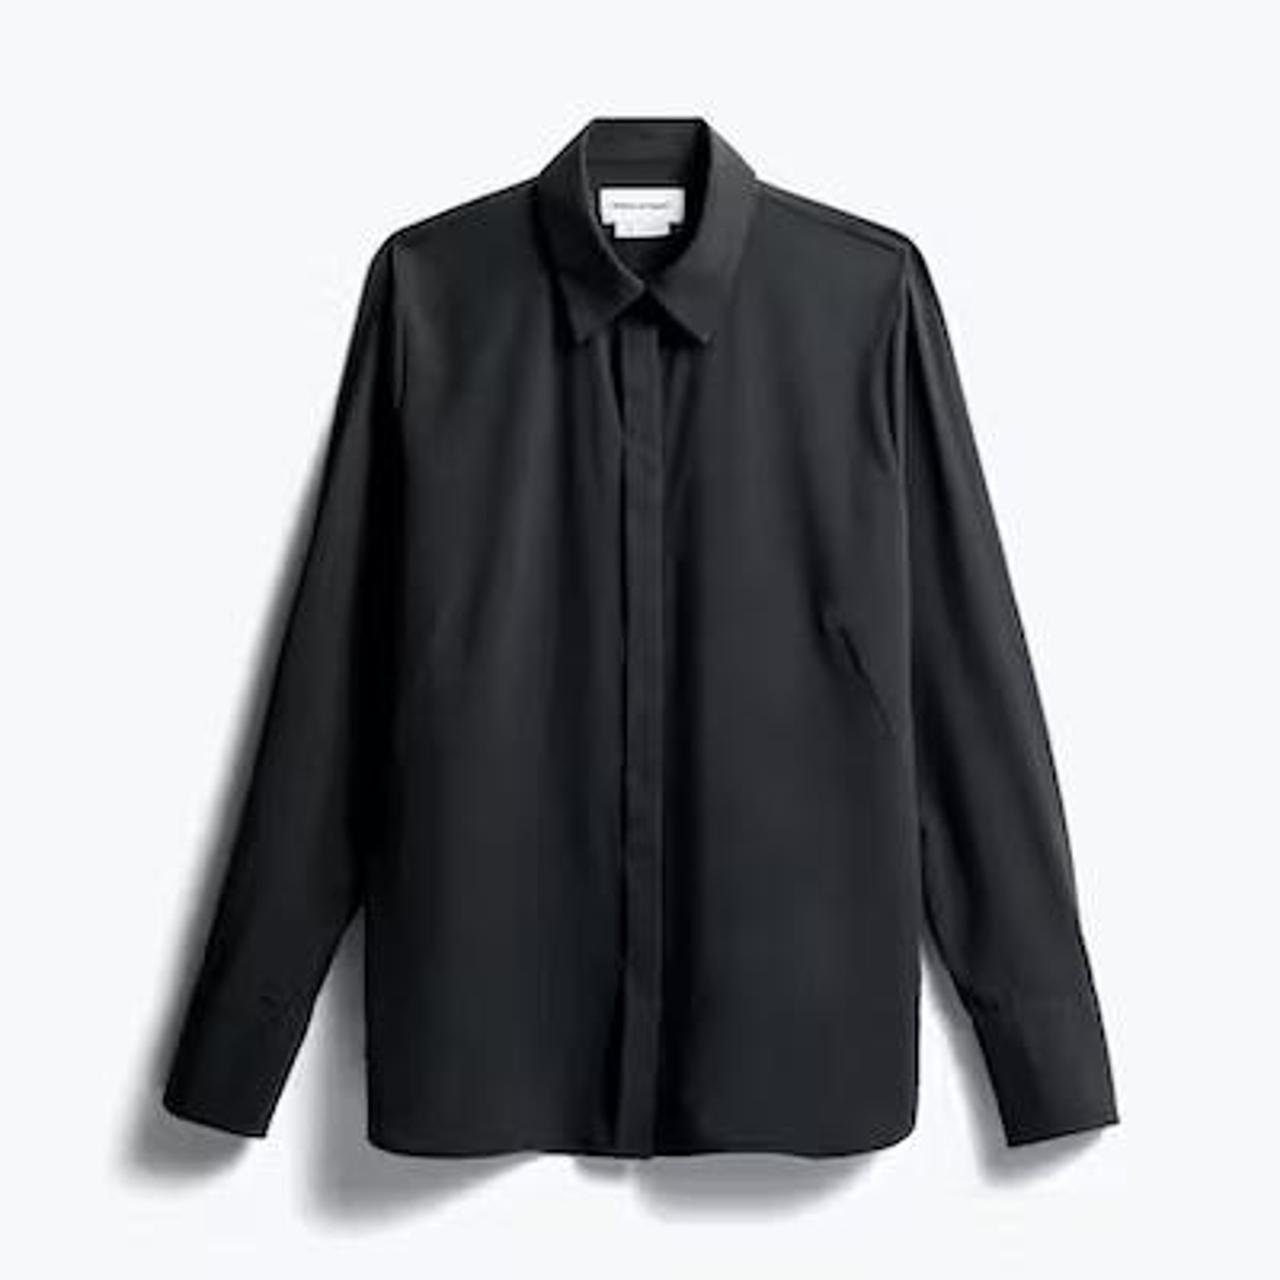 Ministry of Style Women's Black Shirt (2)